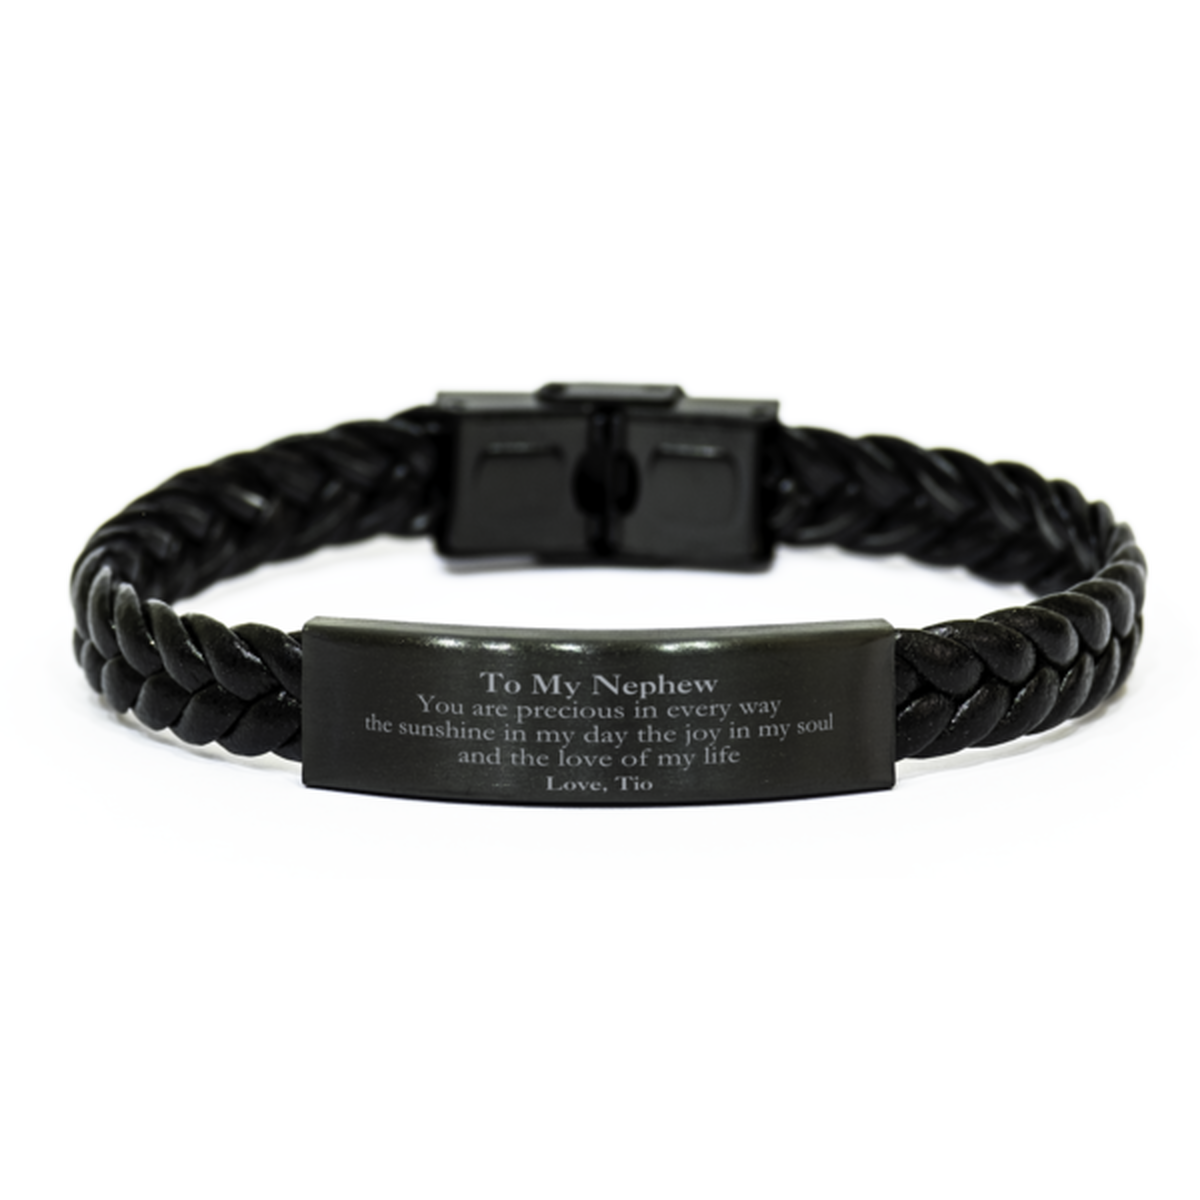 Graduation Gifts for Nephew Braided Leather Bracelet Present from Tio, Christmas Nephew Birthday Gifts Nephew You are precious in every way the sunshine in my day. Love, Tio